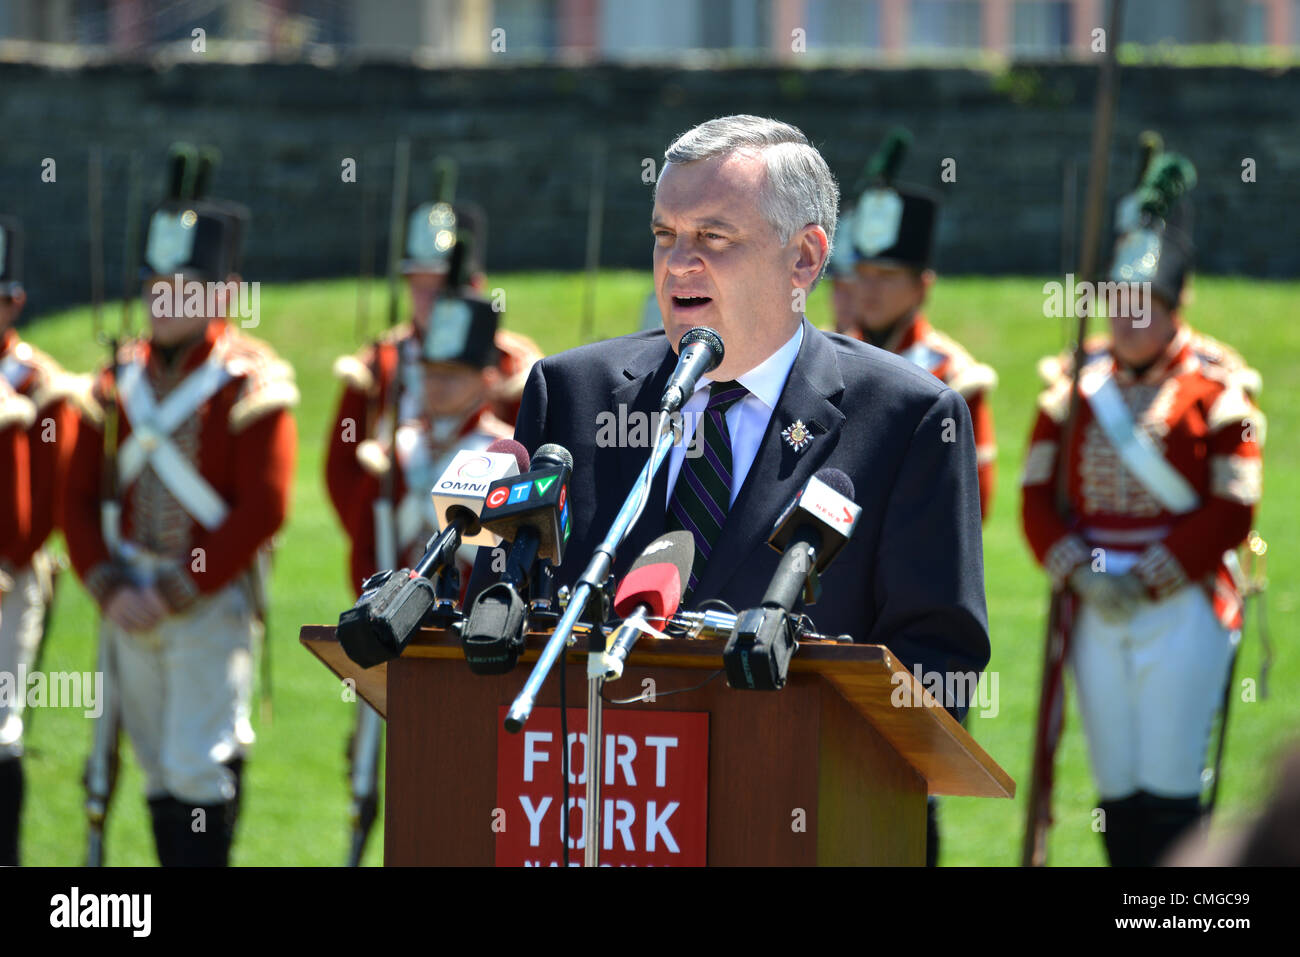 The Lieutenant Governor of Ontario David C. Onley speaking at Fort York, Toronto, Canada, commemorating the war of 1812 between Canada and America, and also Emancipation Day, marking the end of the slave trade in the British Empire in 1834. Stock Photo